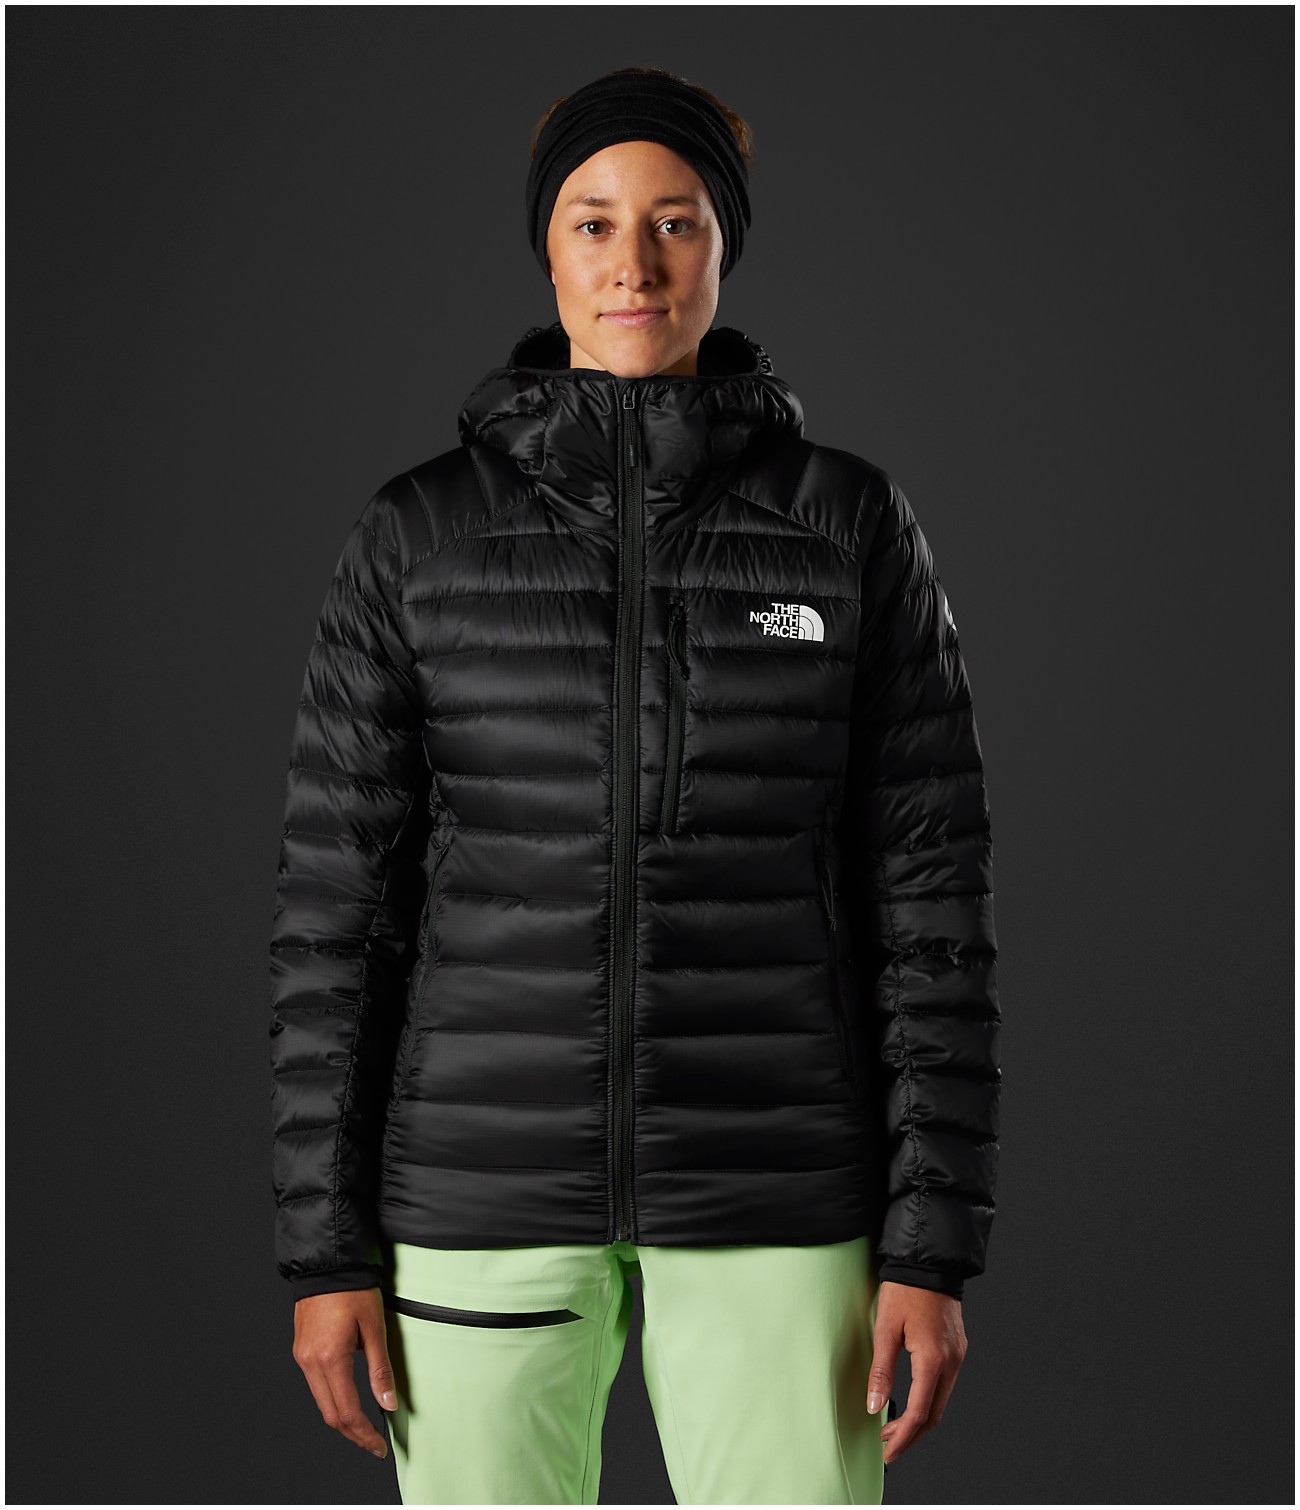 2023 Women's Fresh Styles | The North Face